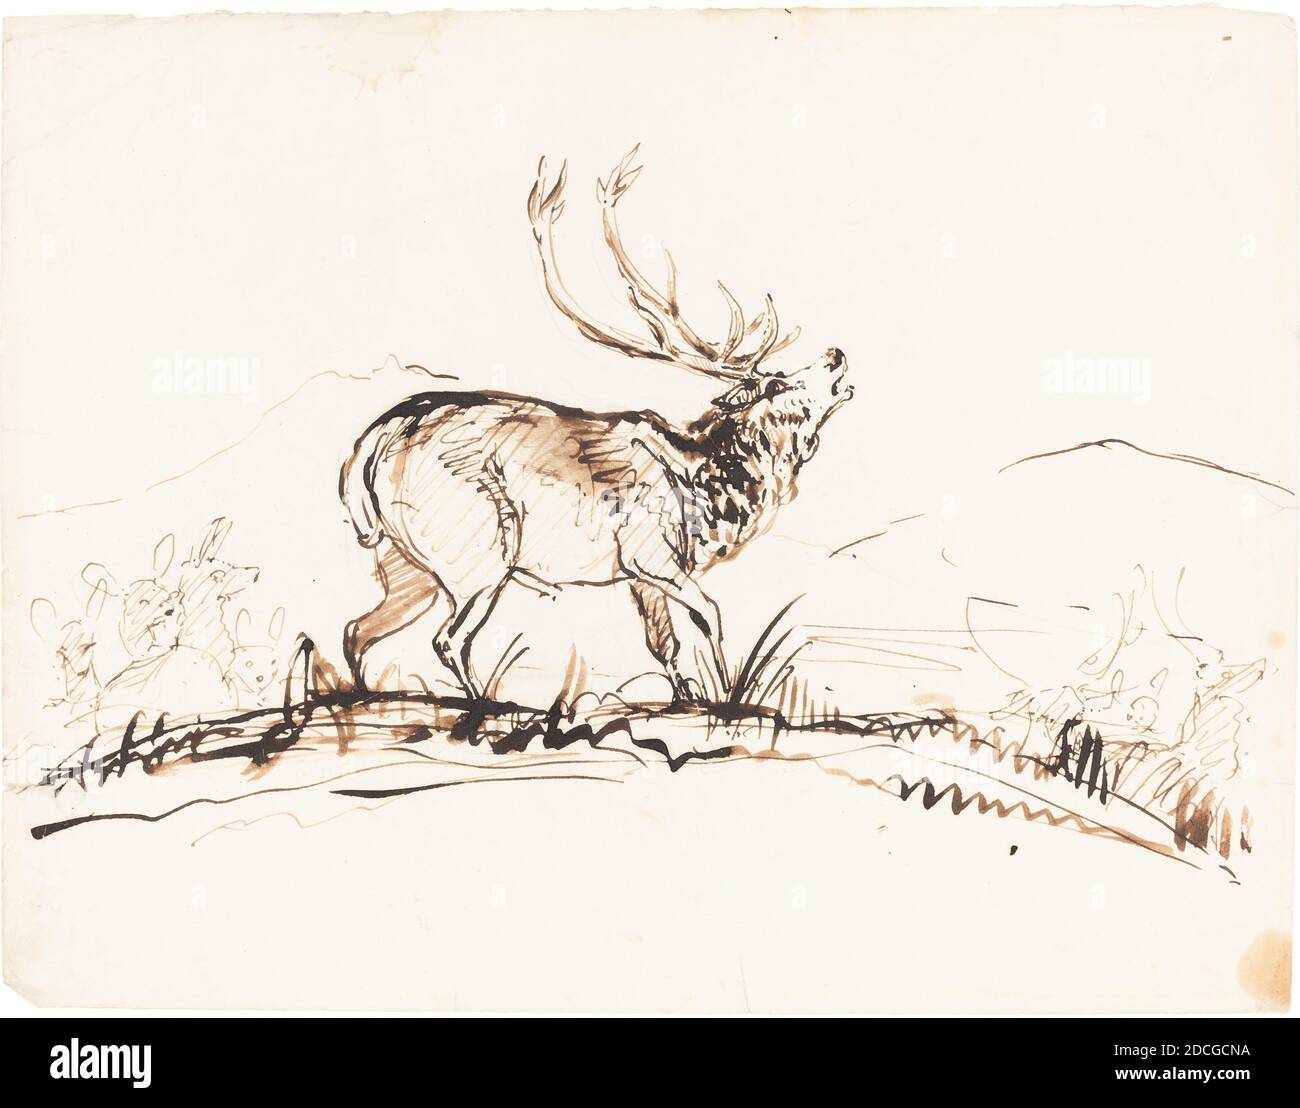 Sir Edwin Landseer, (artist), British, 1802 - 1873, A Bellowing Stag, probably 1840/1850, pen and brown ink over graphite on wove paper, overall: 19 x 24.6 cm (7 1/2 x 9 11/16 in Stock Photo